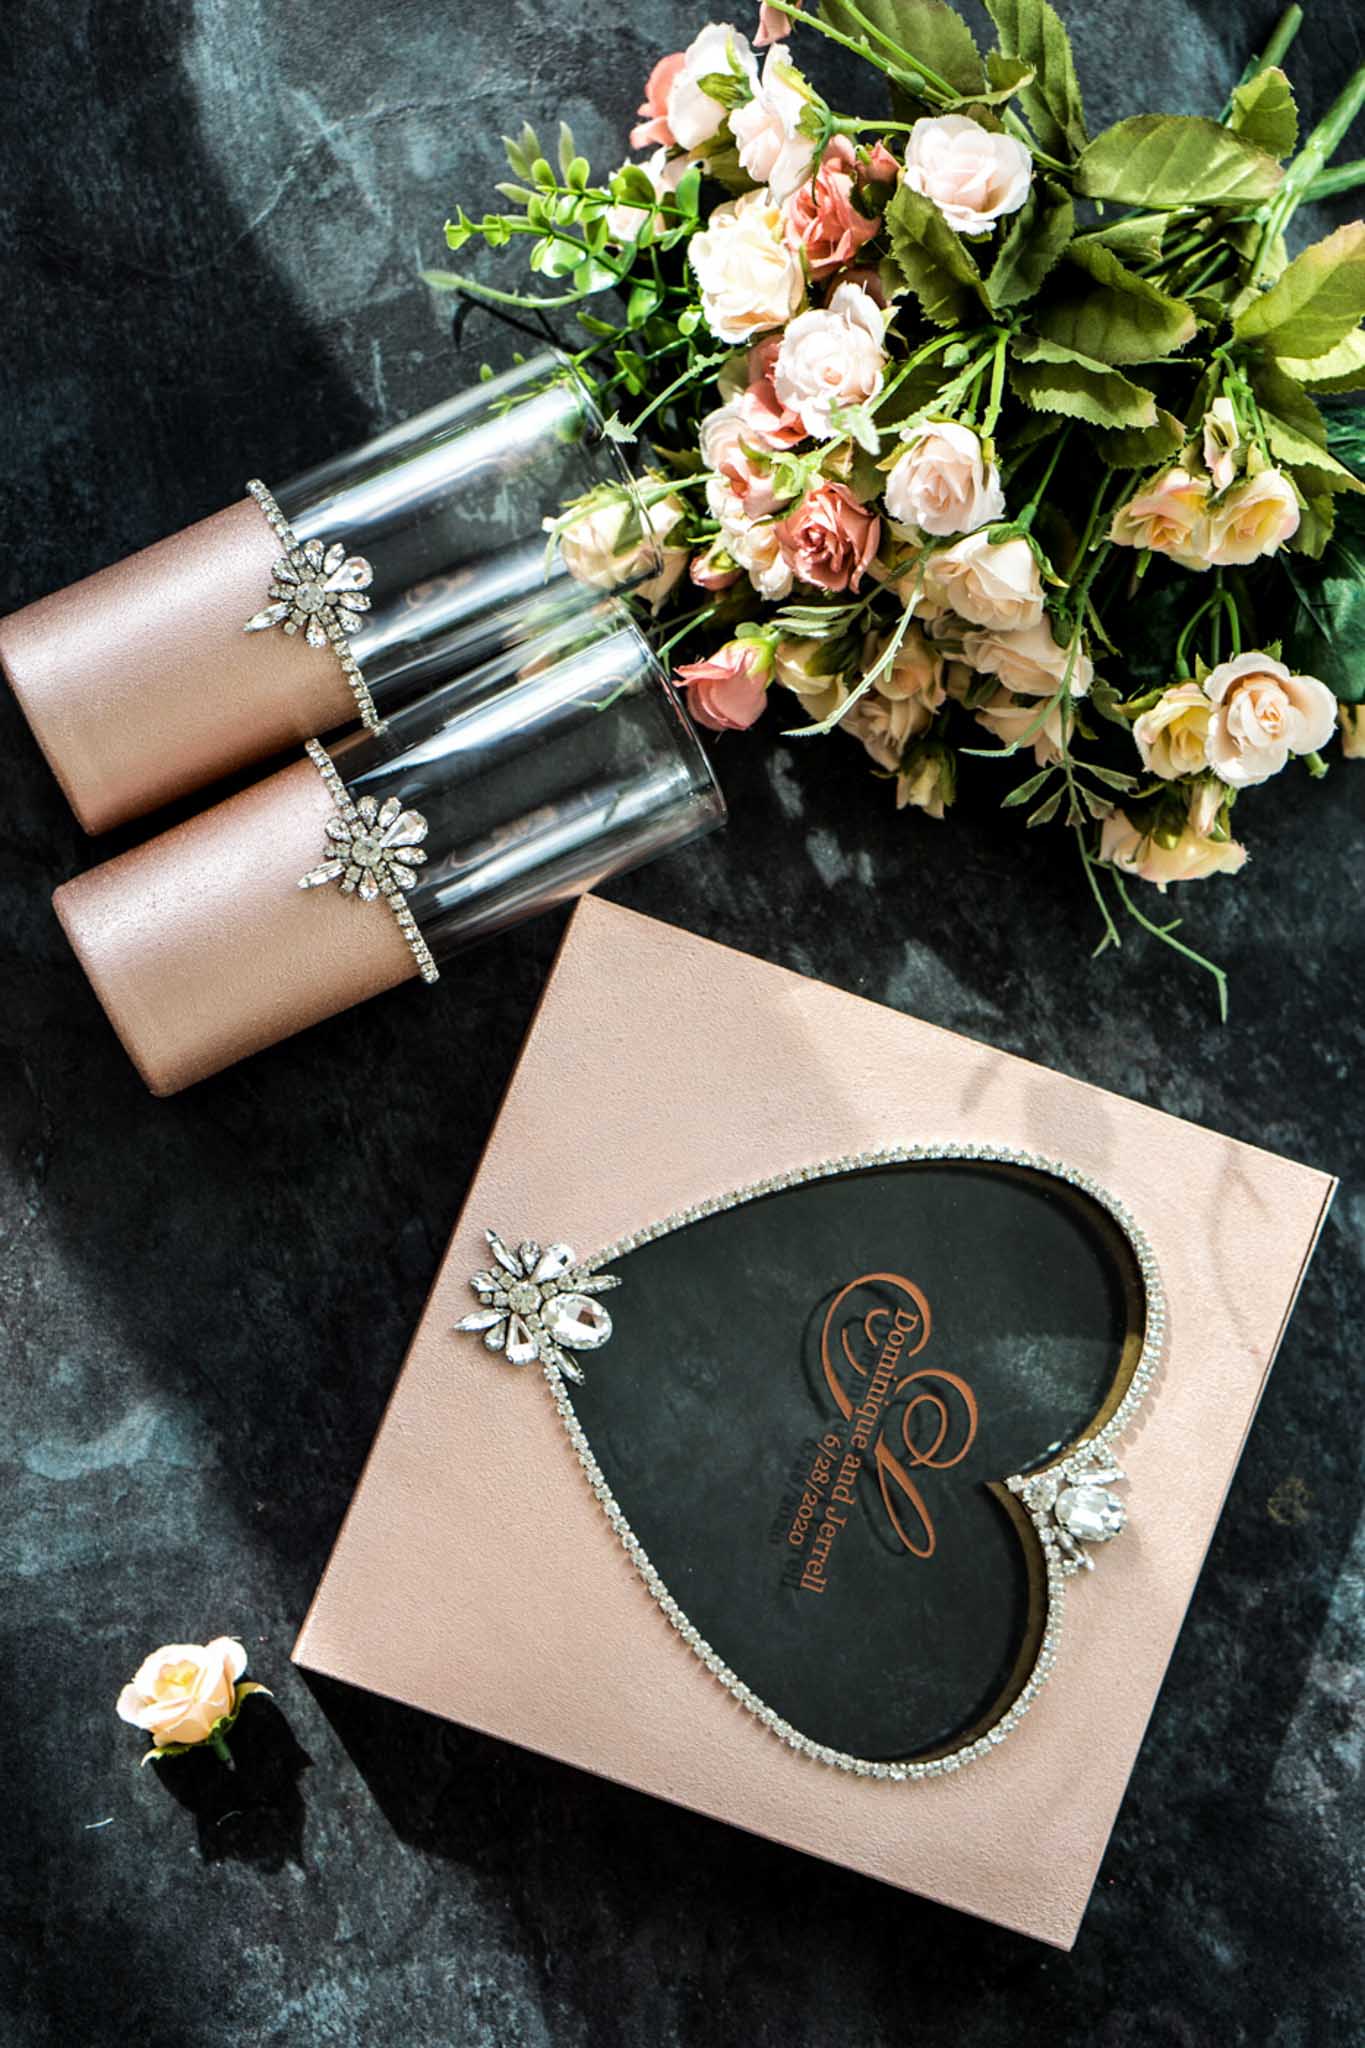 Amanda's deluxe rose gold sand ceremony collection